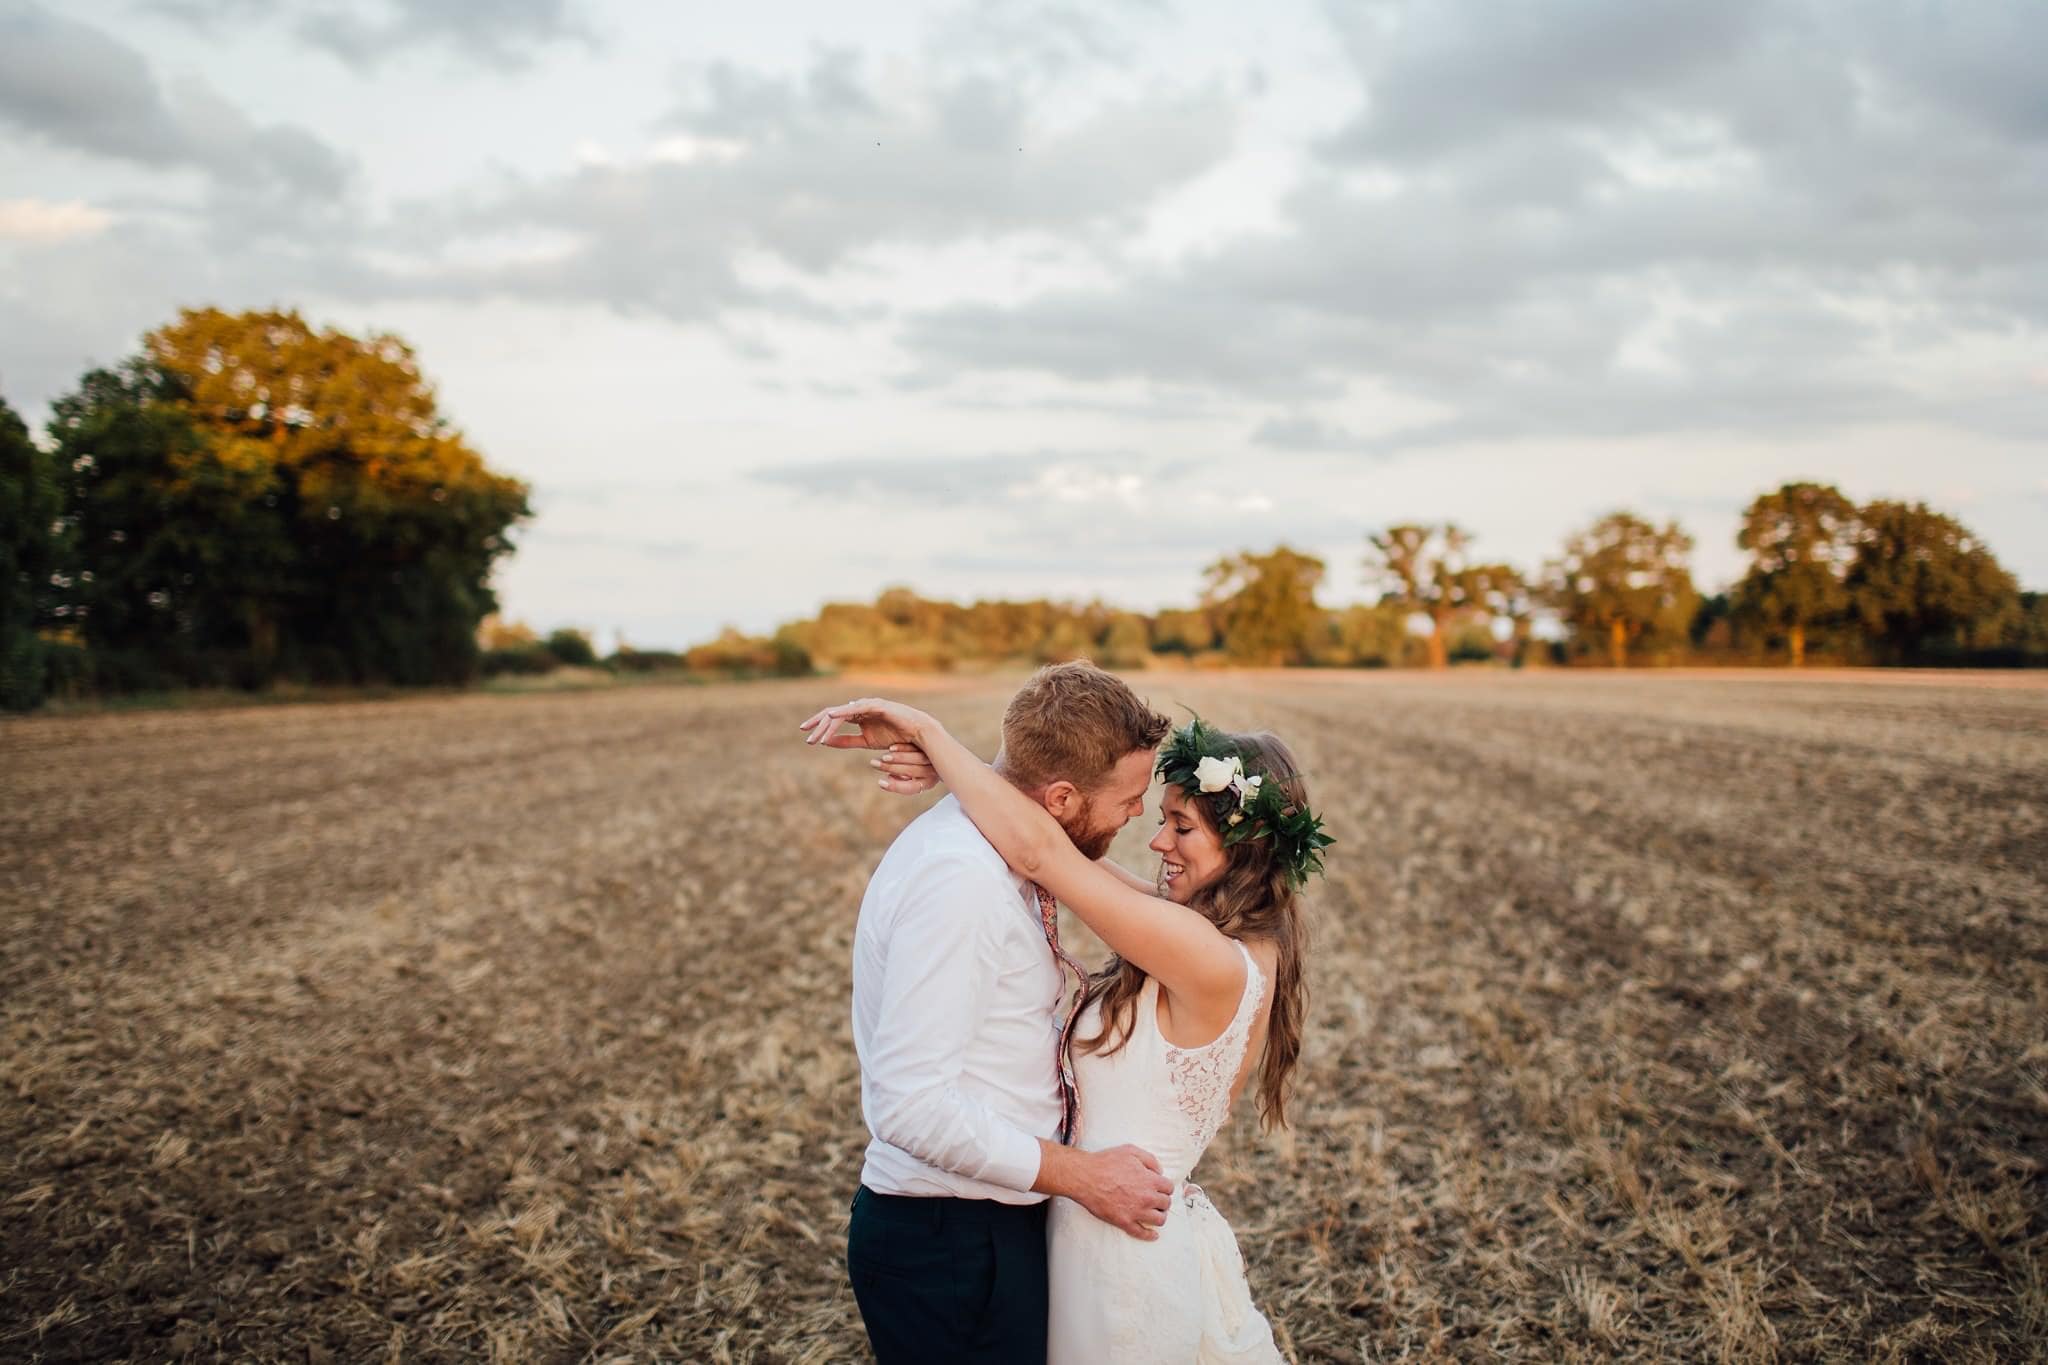 sunset portrait of bride and groom in a field